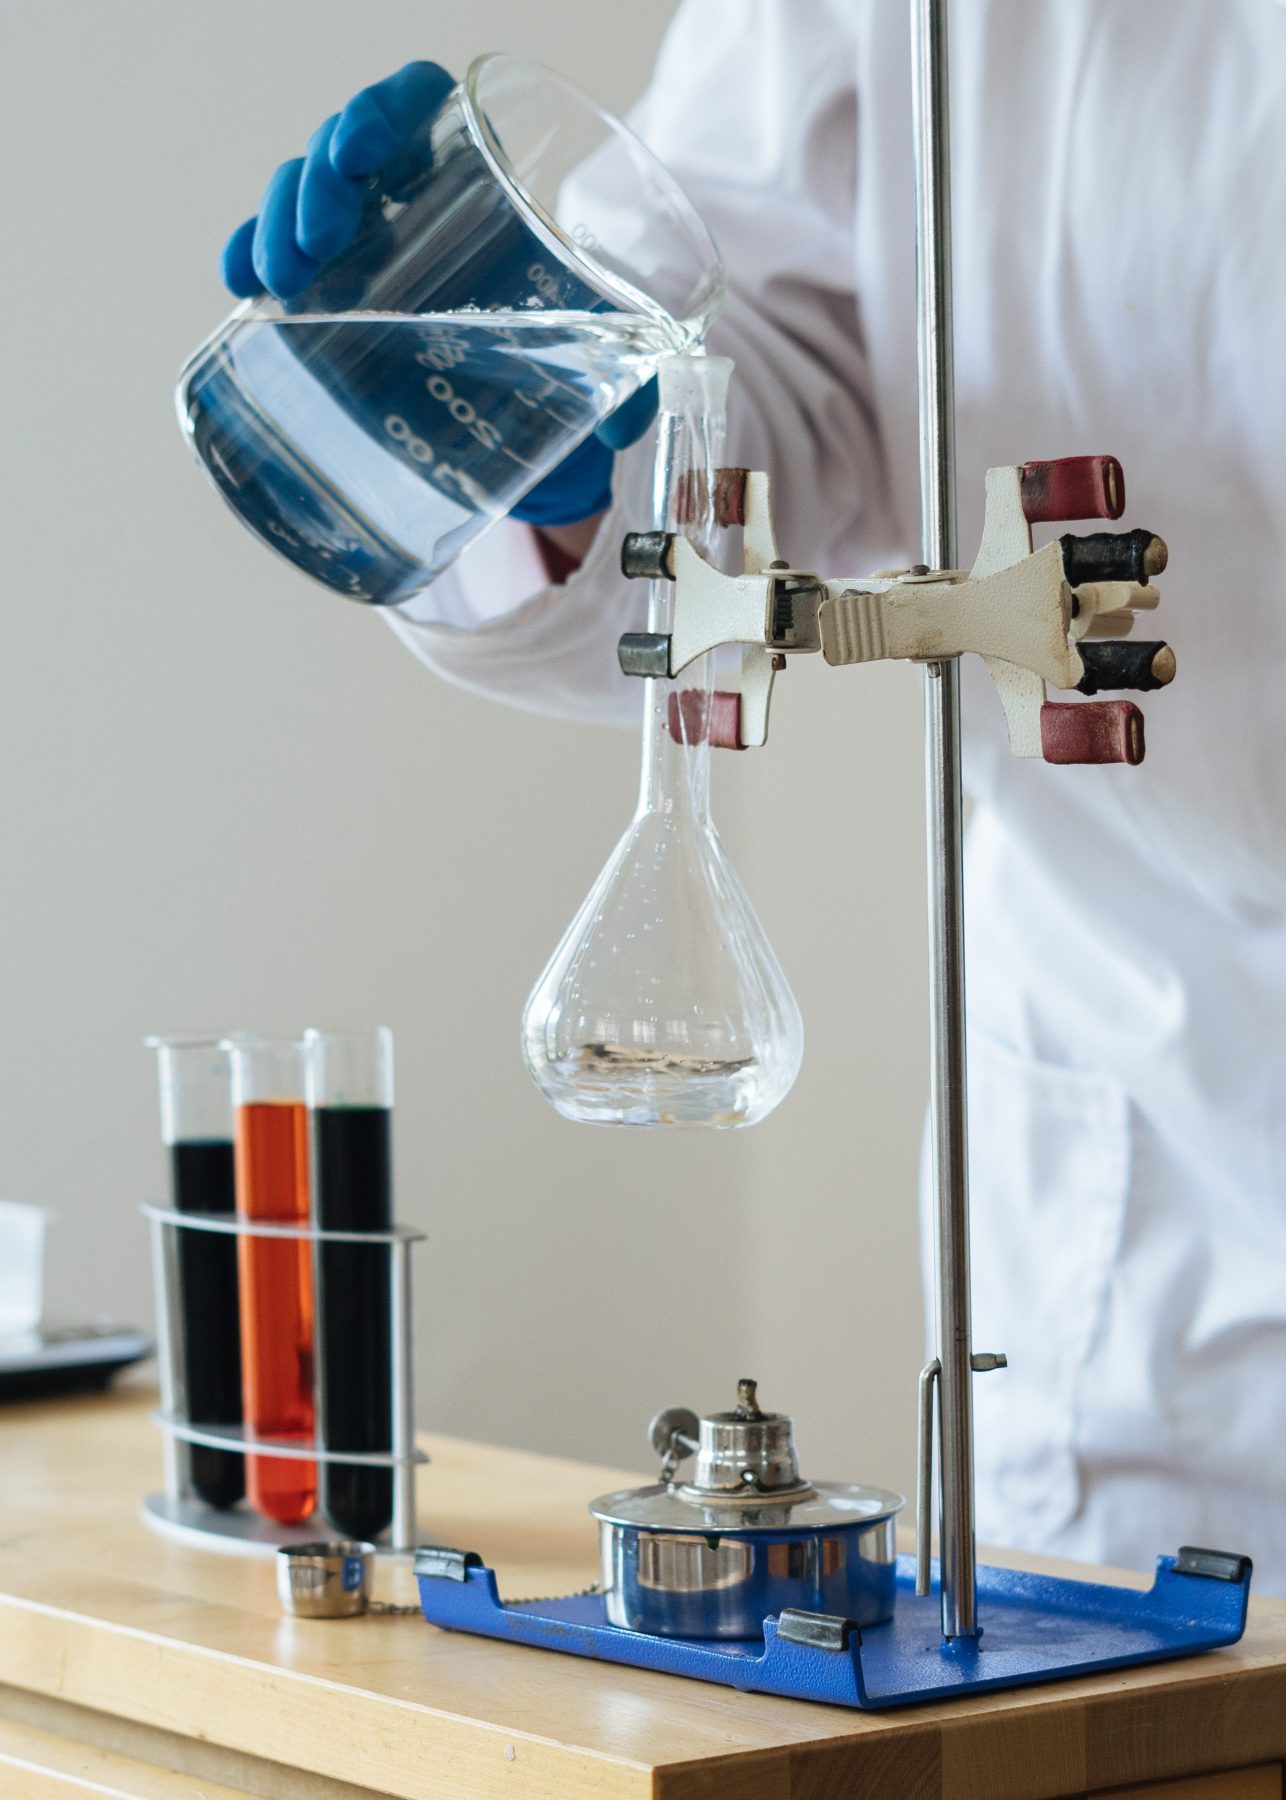 A scientist mixing two liquids with tubes next to him, biochemical process.